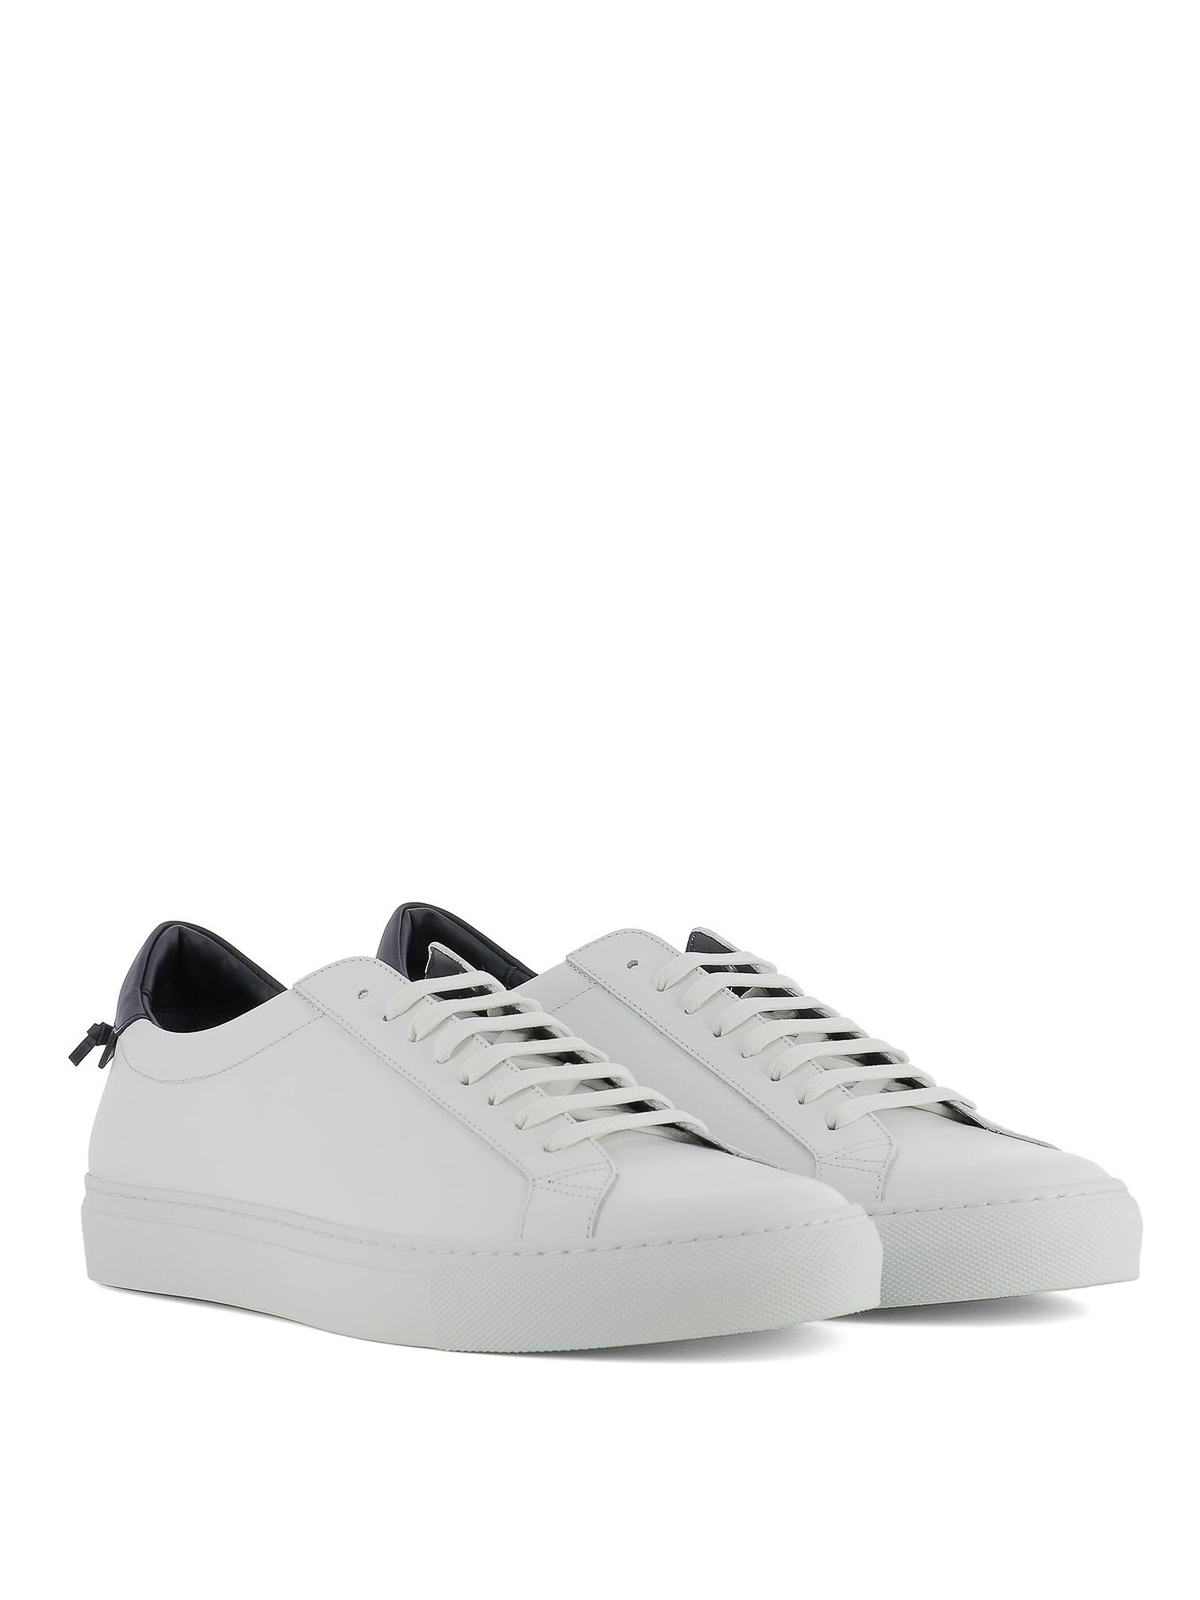 givenchy knot trainers